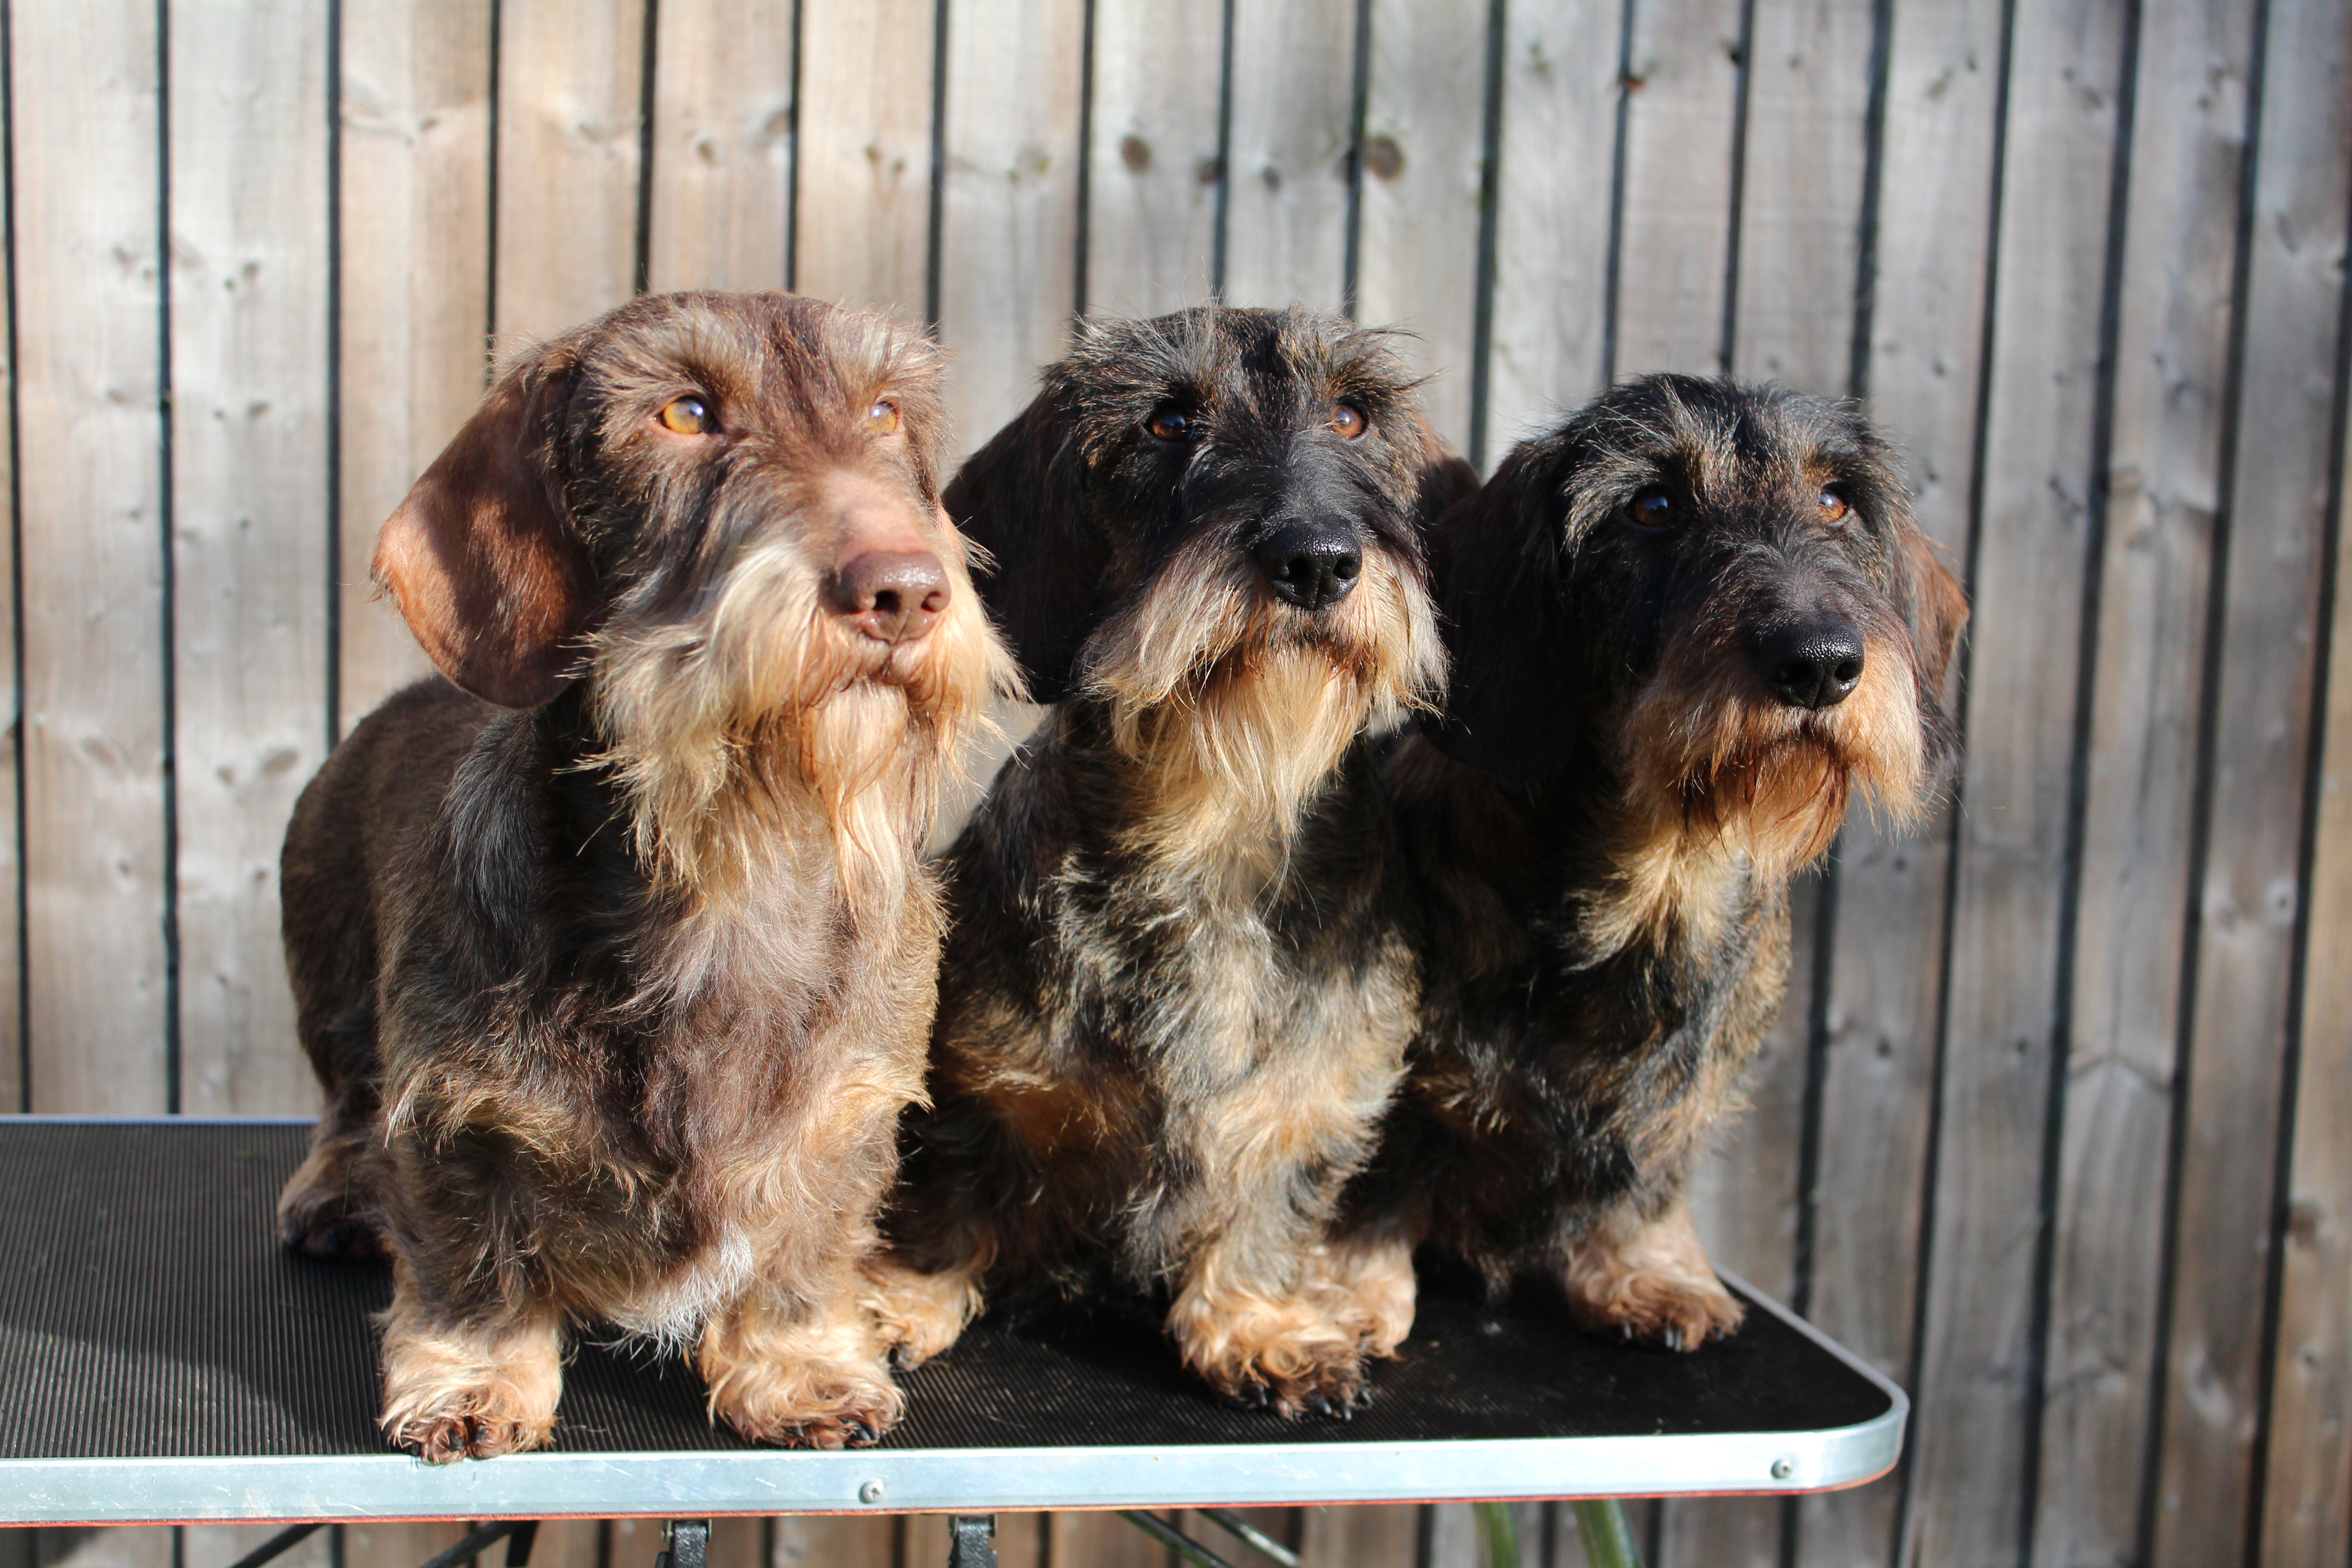 Sunsong Wirehaired Dachshunds – Crufts 2015 Team Photo | Sunsong.co.uk